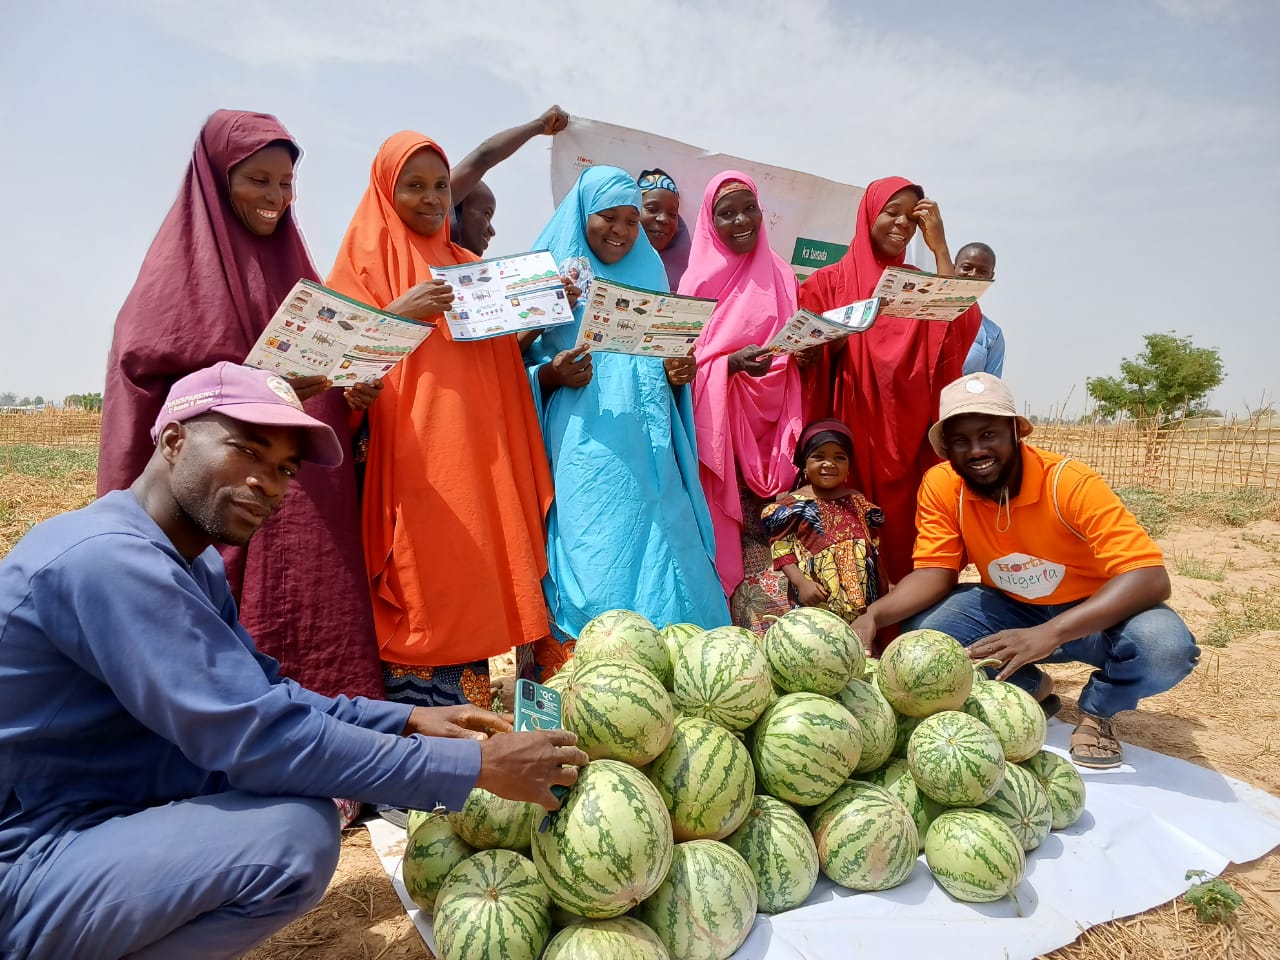 Women holding crop guides stand in front of a pile of watermelons, with men flanking the watermelons.